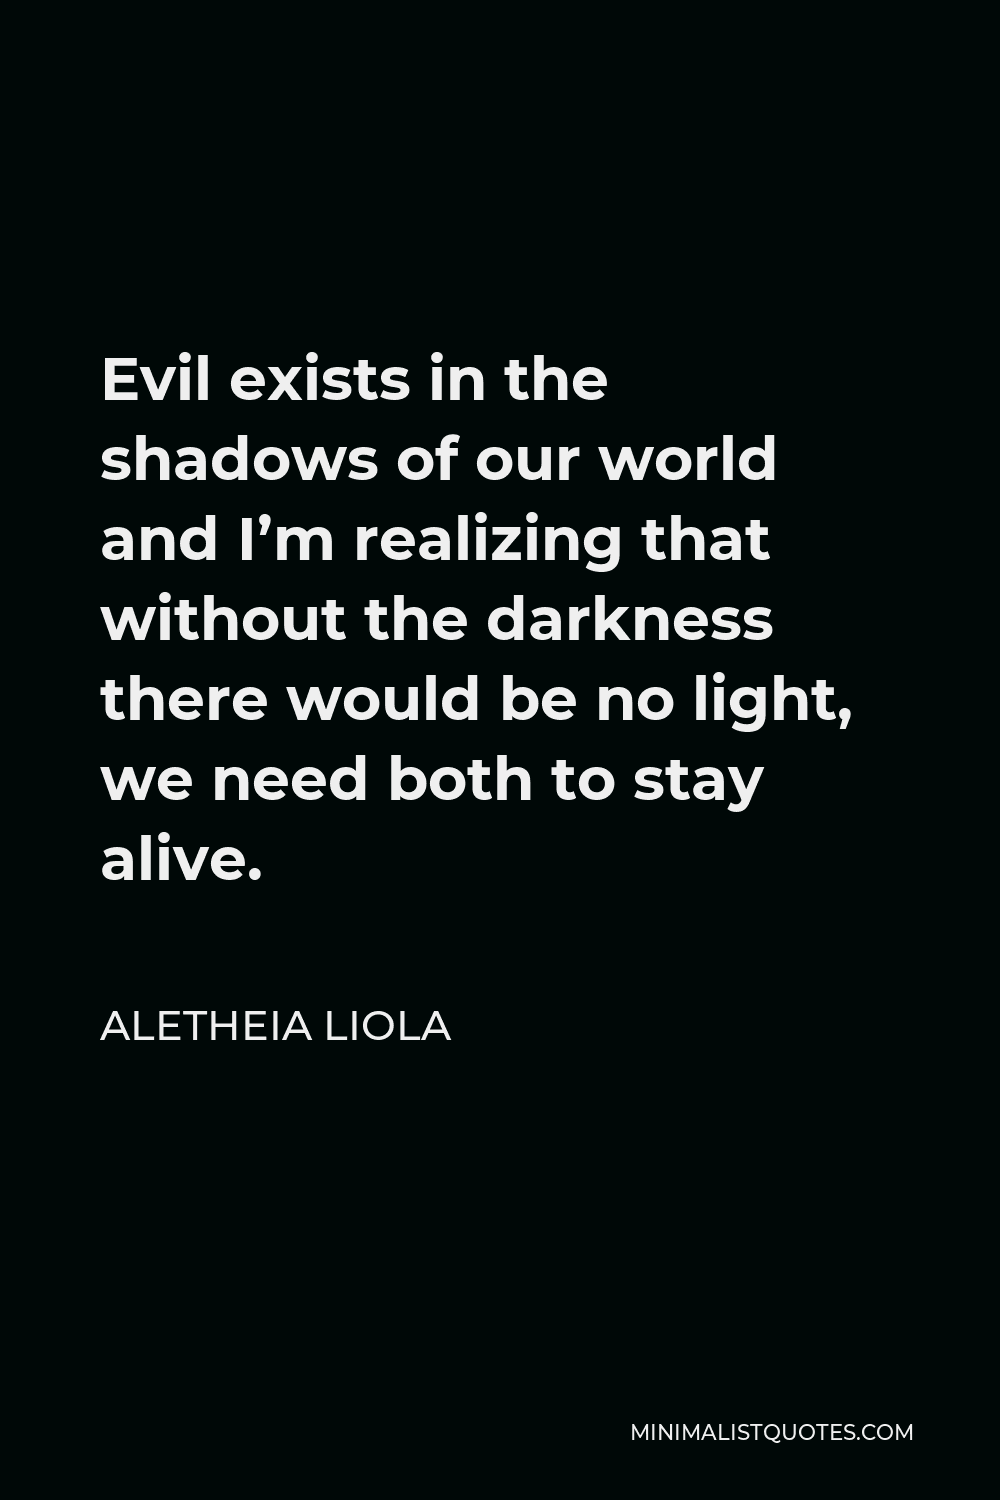 Aletheia Liola Quote - Evil exists in the shadows of our world and I’m realizing that without the darkness there would be no light. We need both to stay alive.